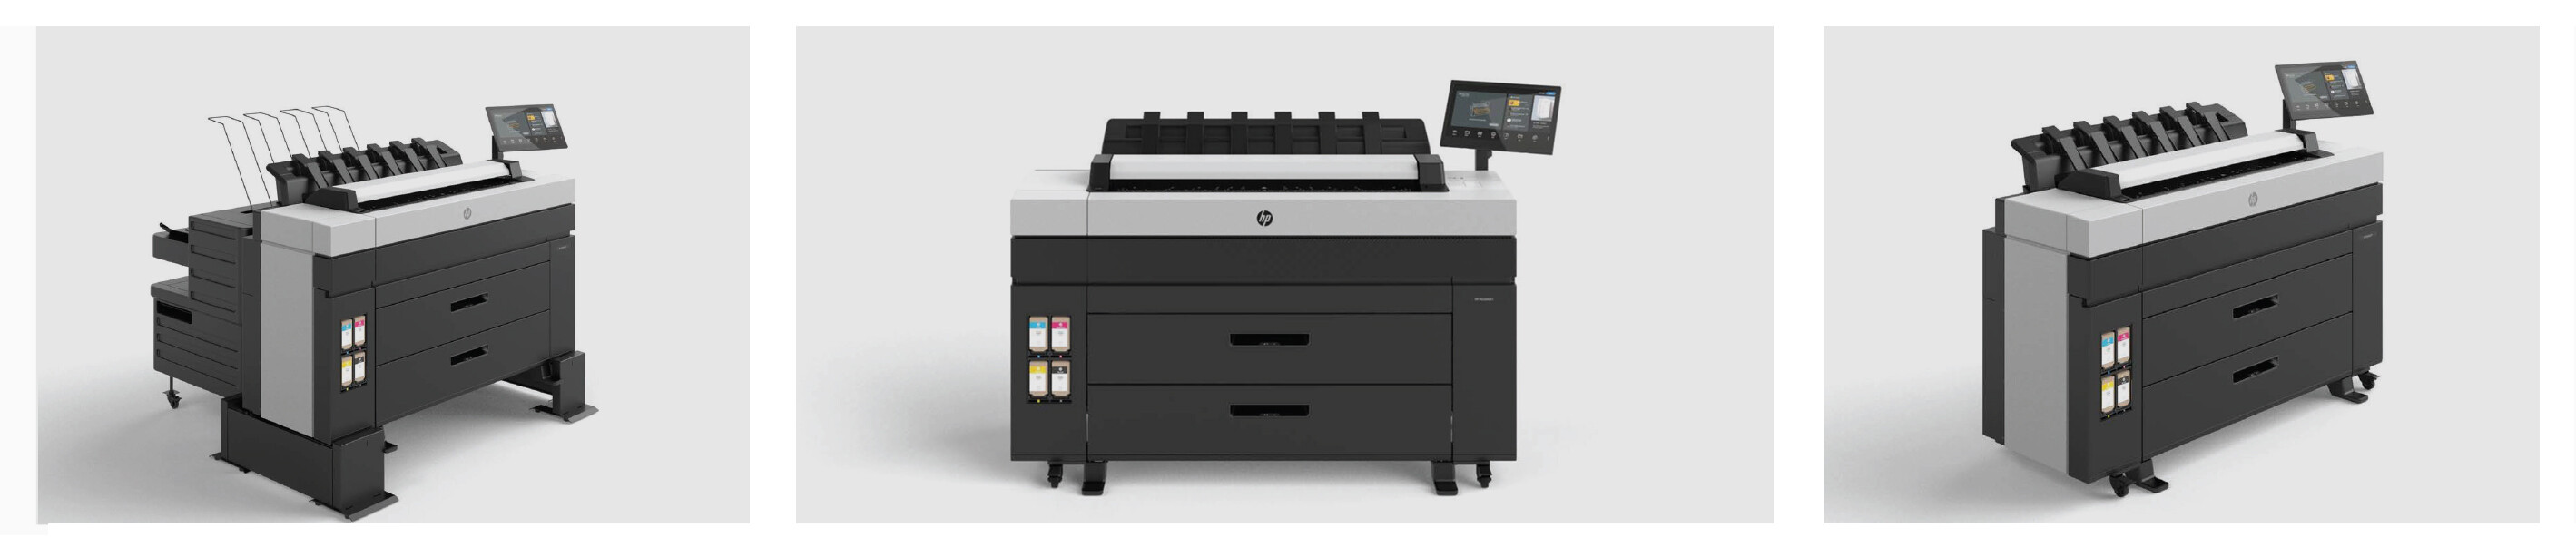 HP XL3800 multi images